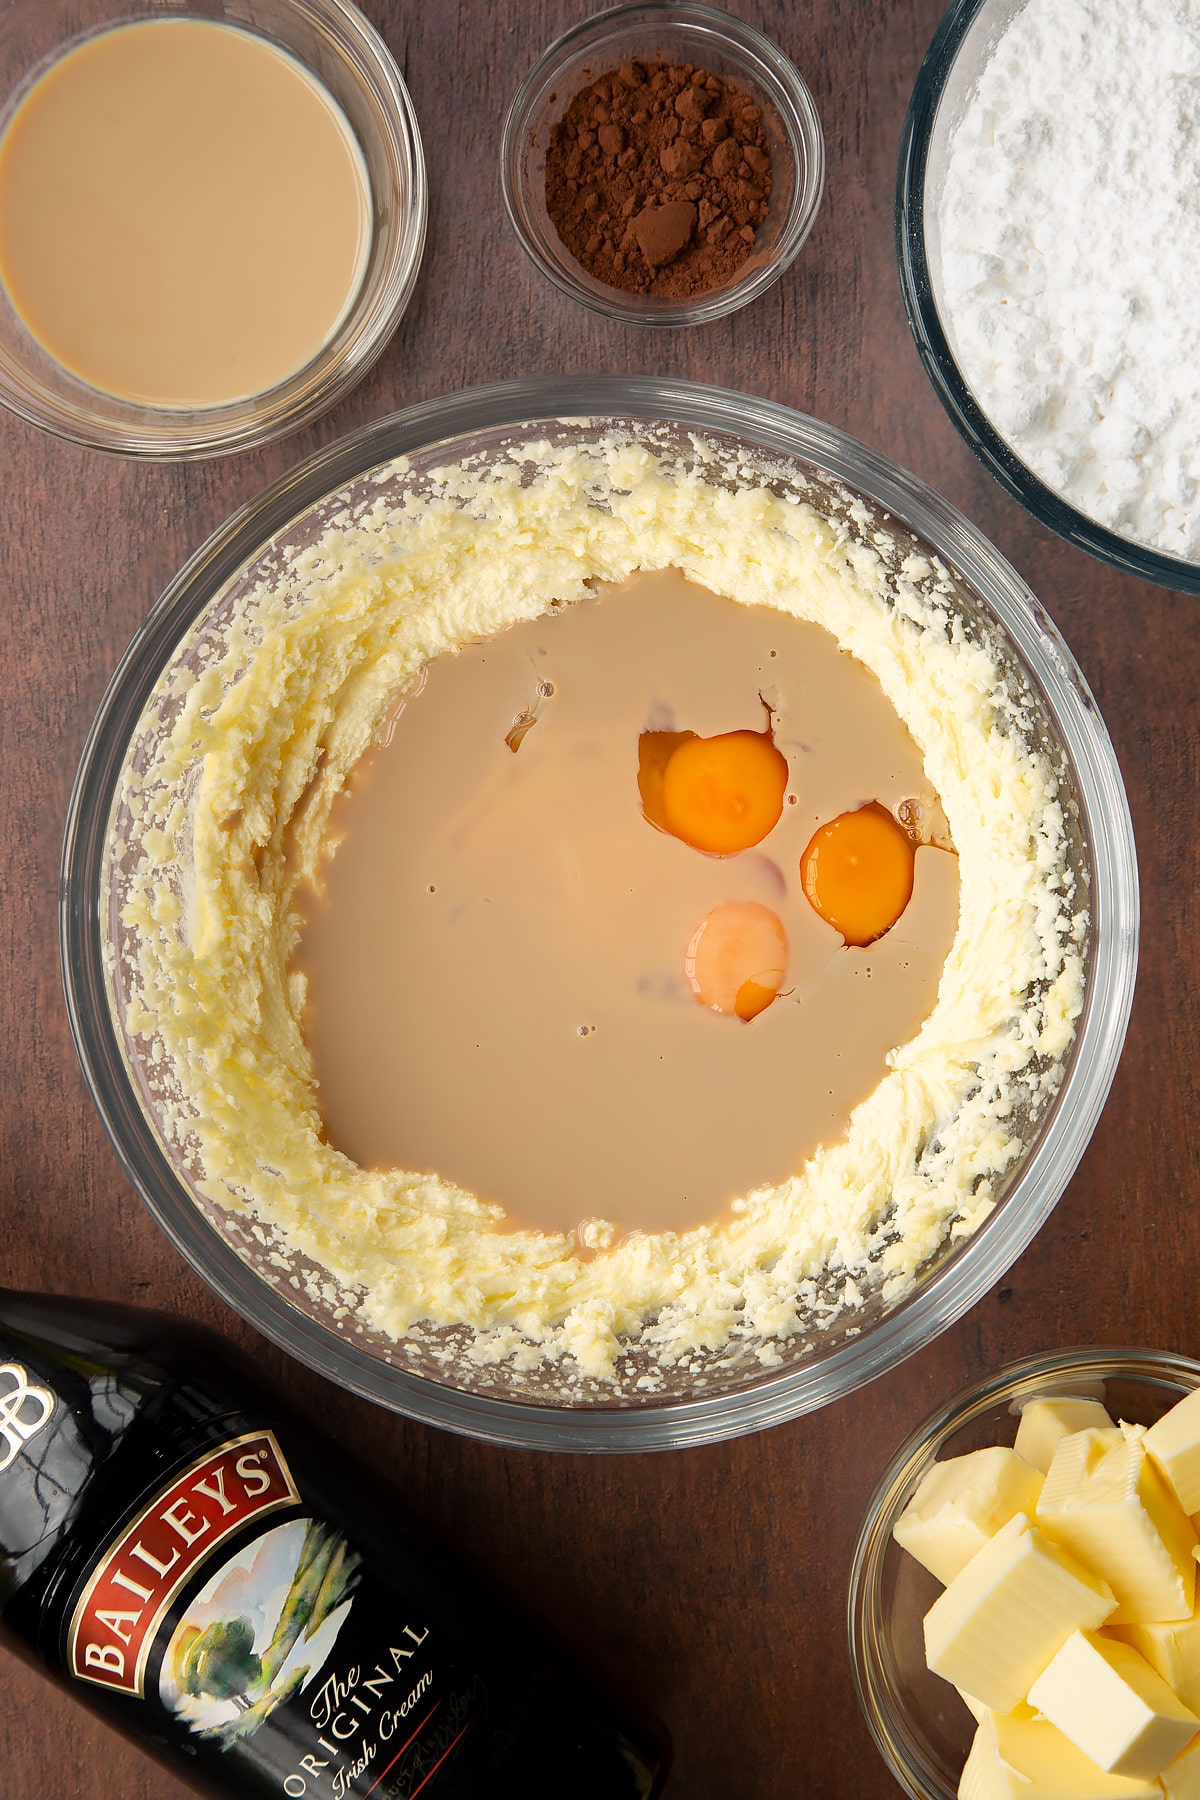 Butter, oil and sugar, whisked together in a glass mixing bowl with Baileys and eggs on top. Ingredients to make Baileys chocolate cupcakes surround the bowl.